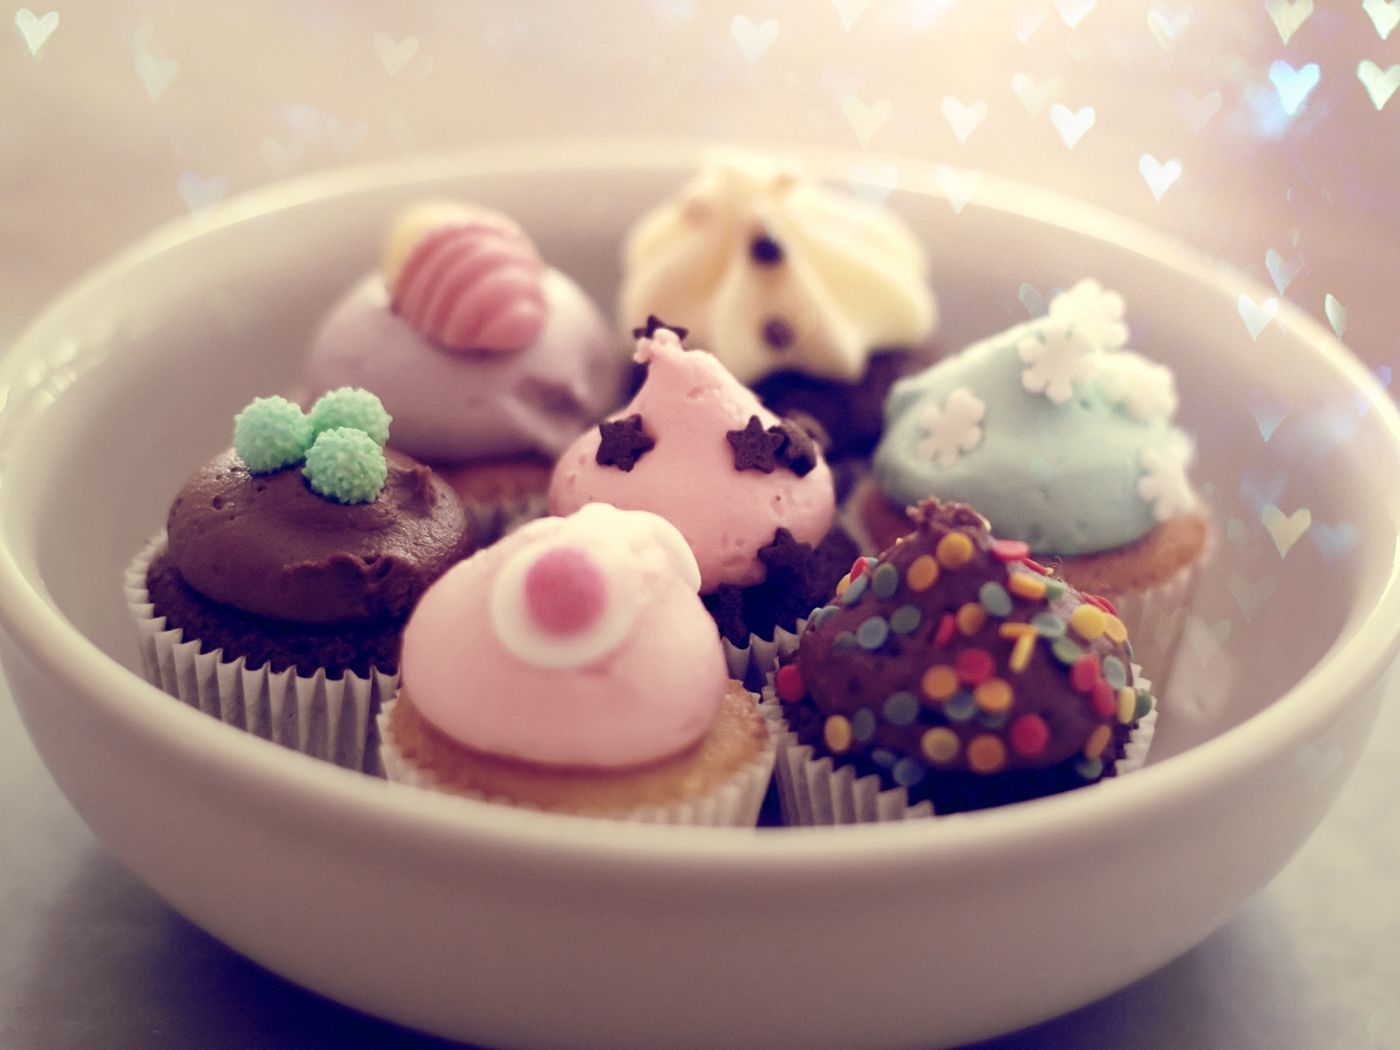 Download wallpaper 1400x1050 cakes, cupcakes, plate, glare, dessert standard 4:3 HD background